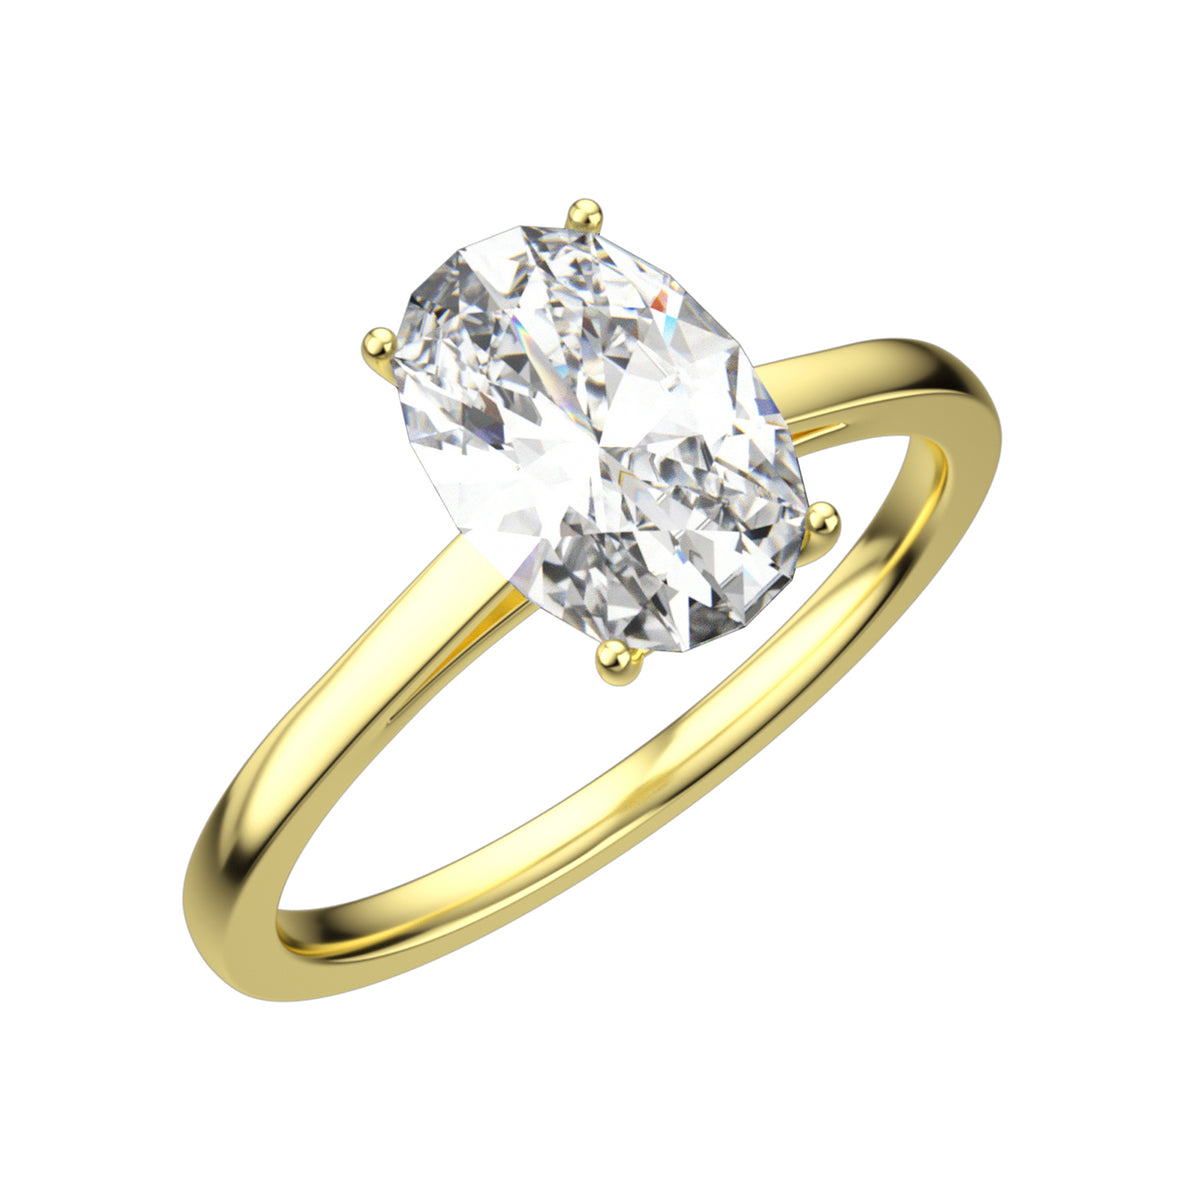 Vintage Bare Oval Moissanite Diamond Engagement Ring in Yellow/White Gold